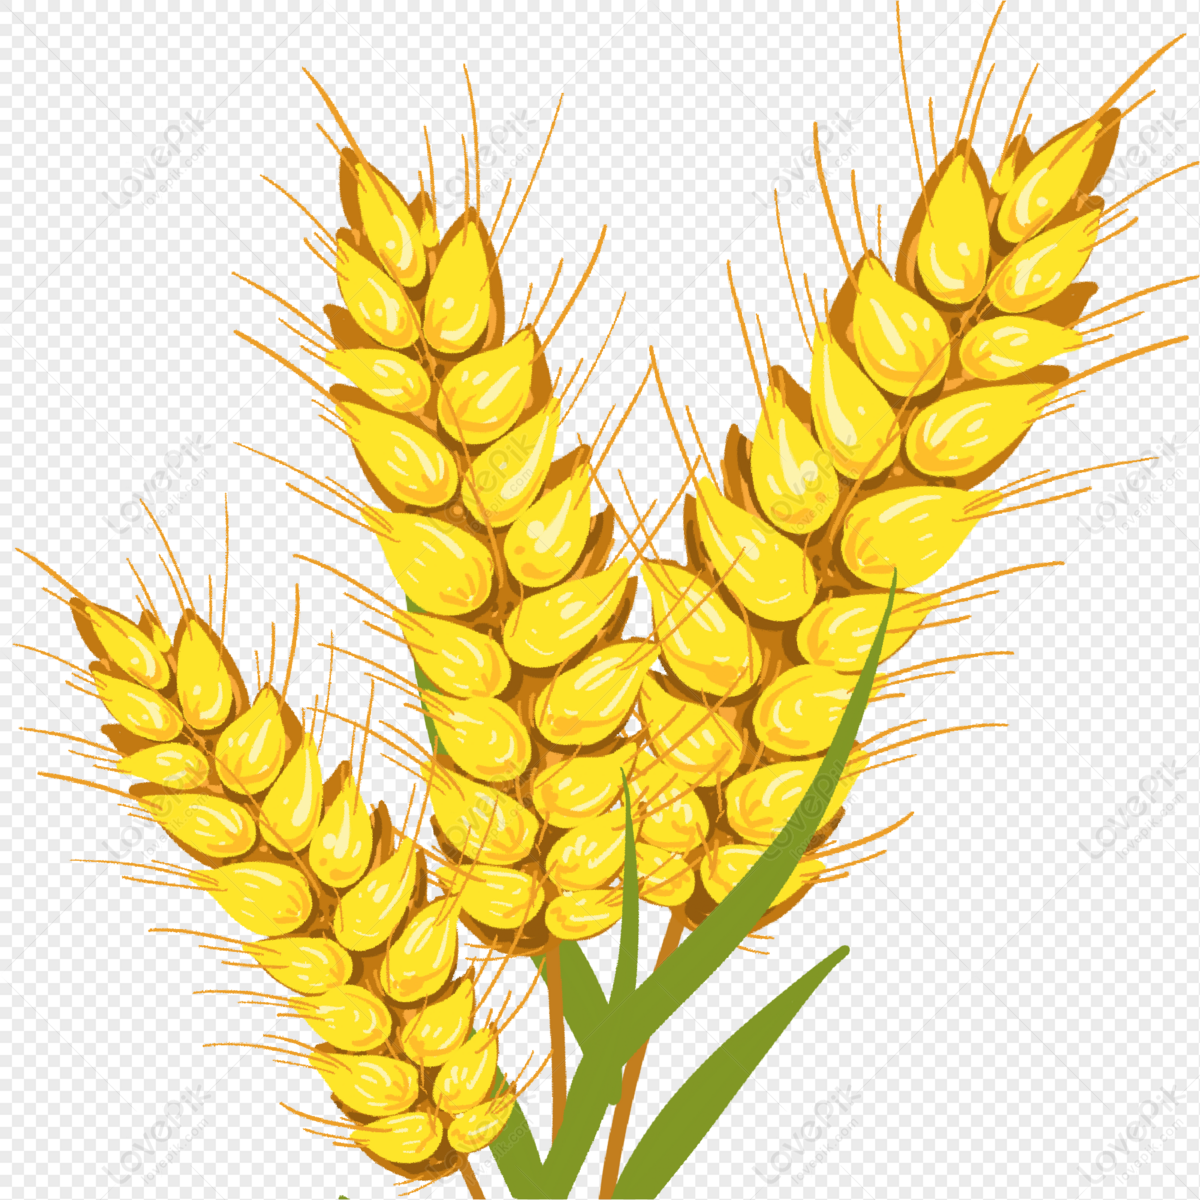 Cartoon Golden Yellow Full Of Wheat Ears PNG Transparent Image And Clipart  Image For Free Download - Lovepik | 401555657